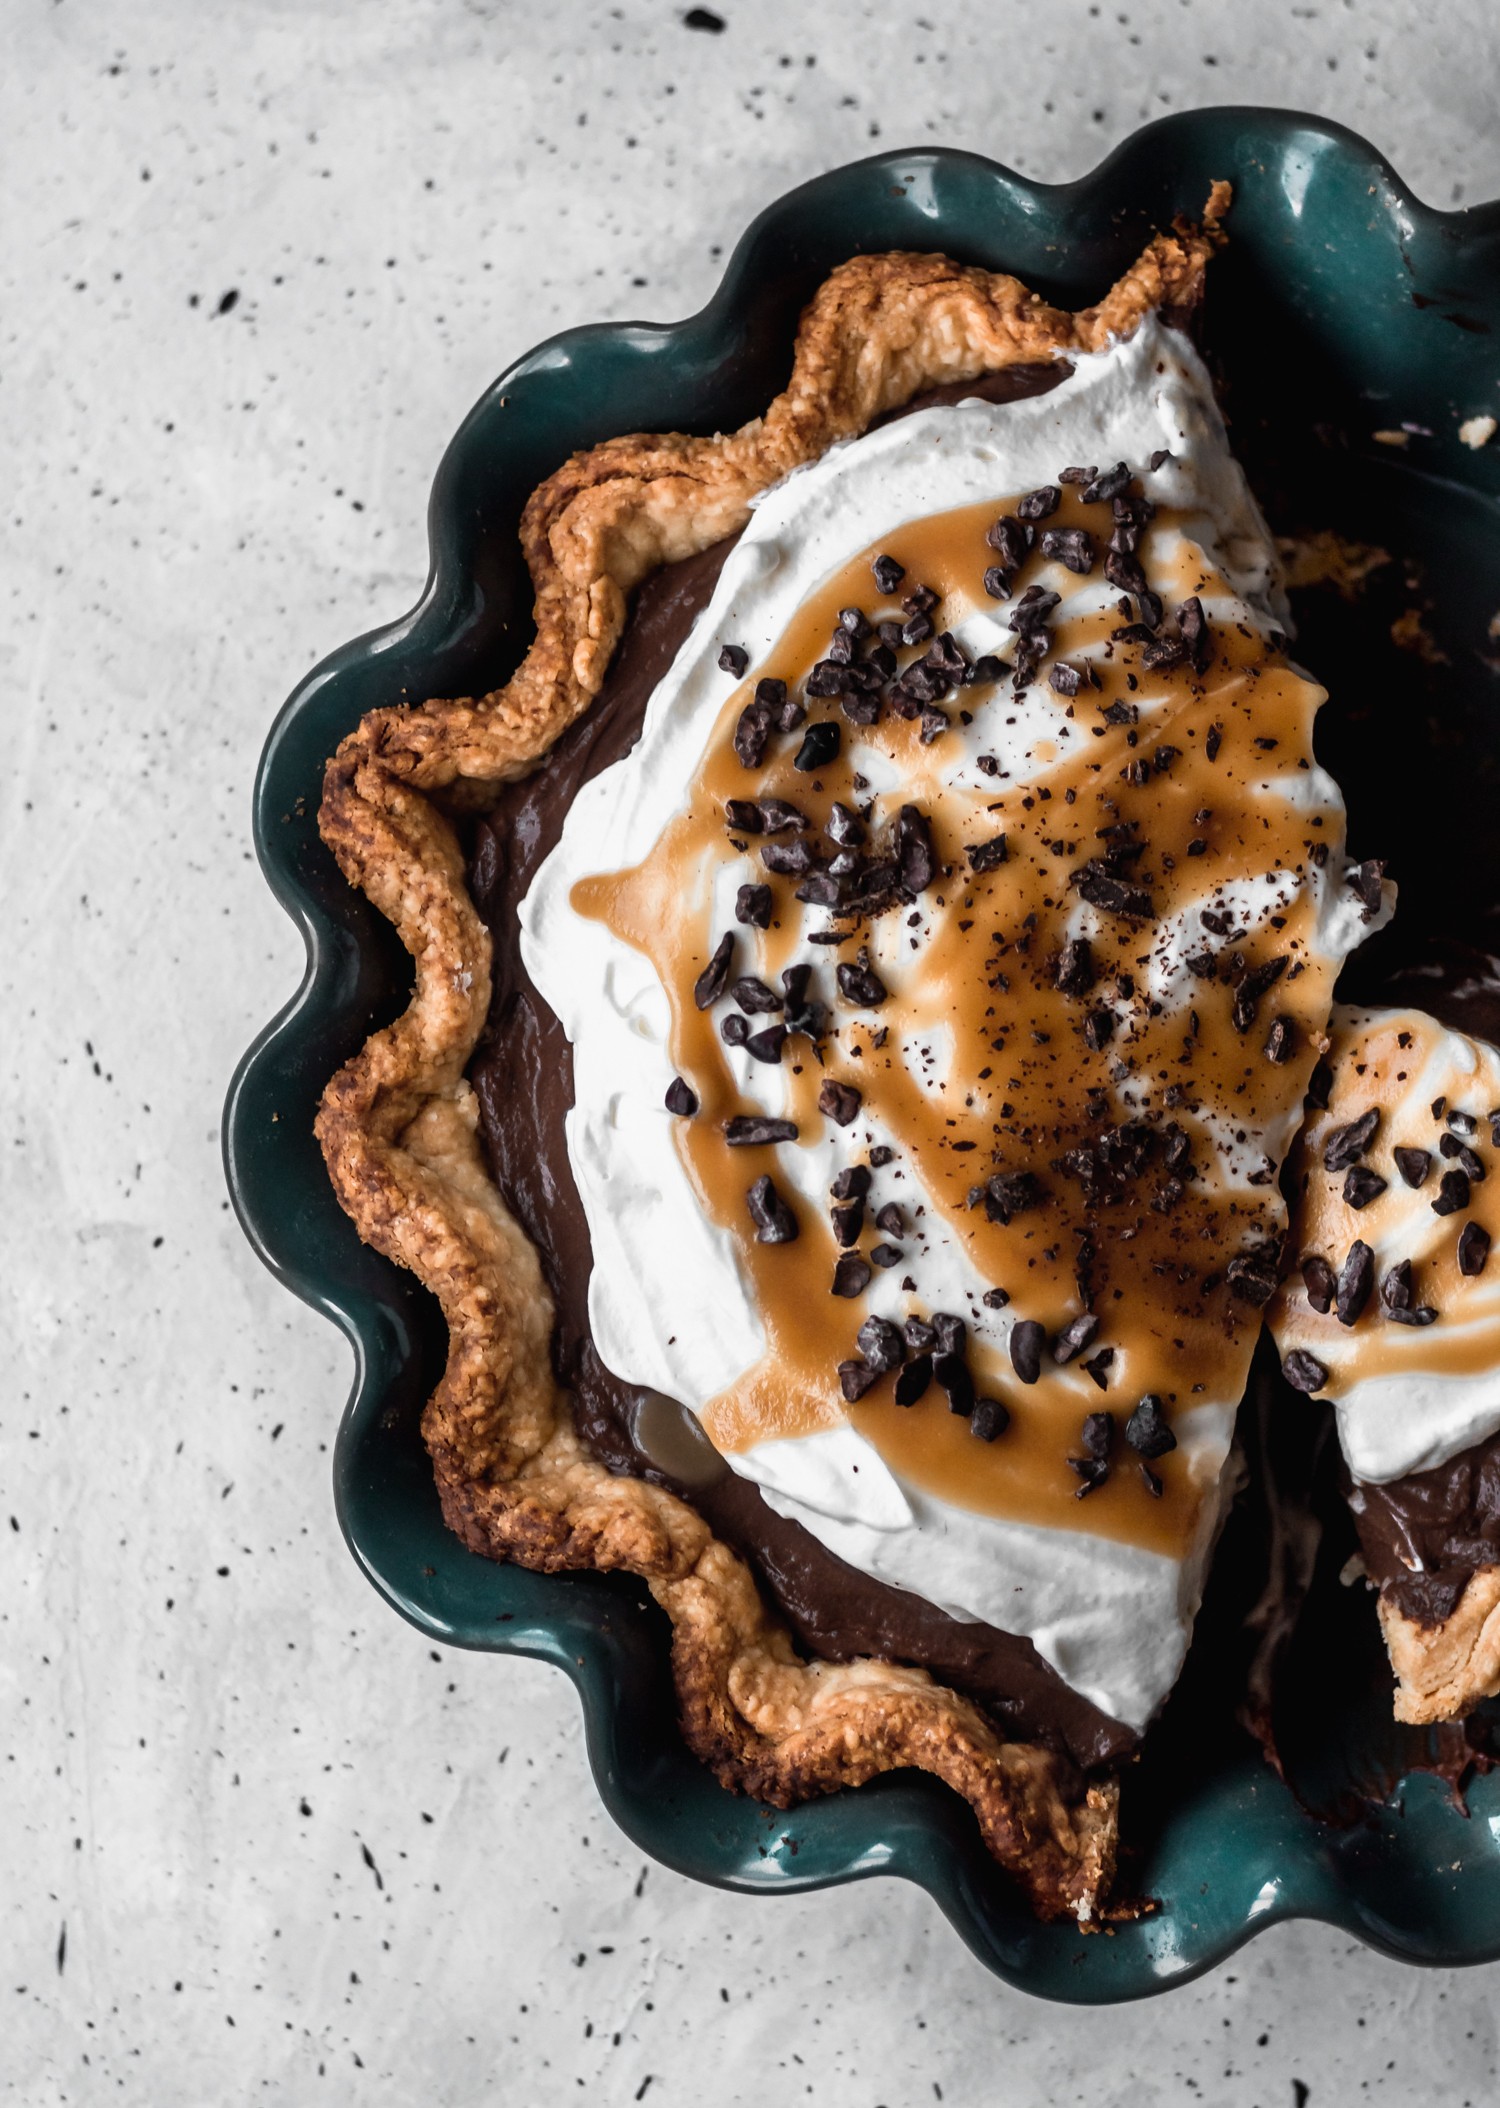 A very closeup image of a chocolate cream pie topped with whipped cream, drizzled with bourbon butterscotch, and sprinkled with cacao nibs.